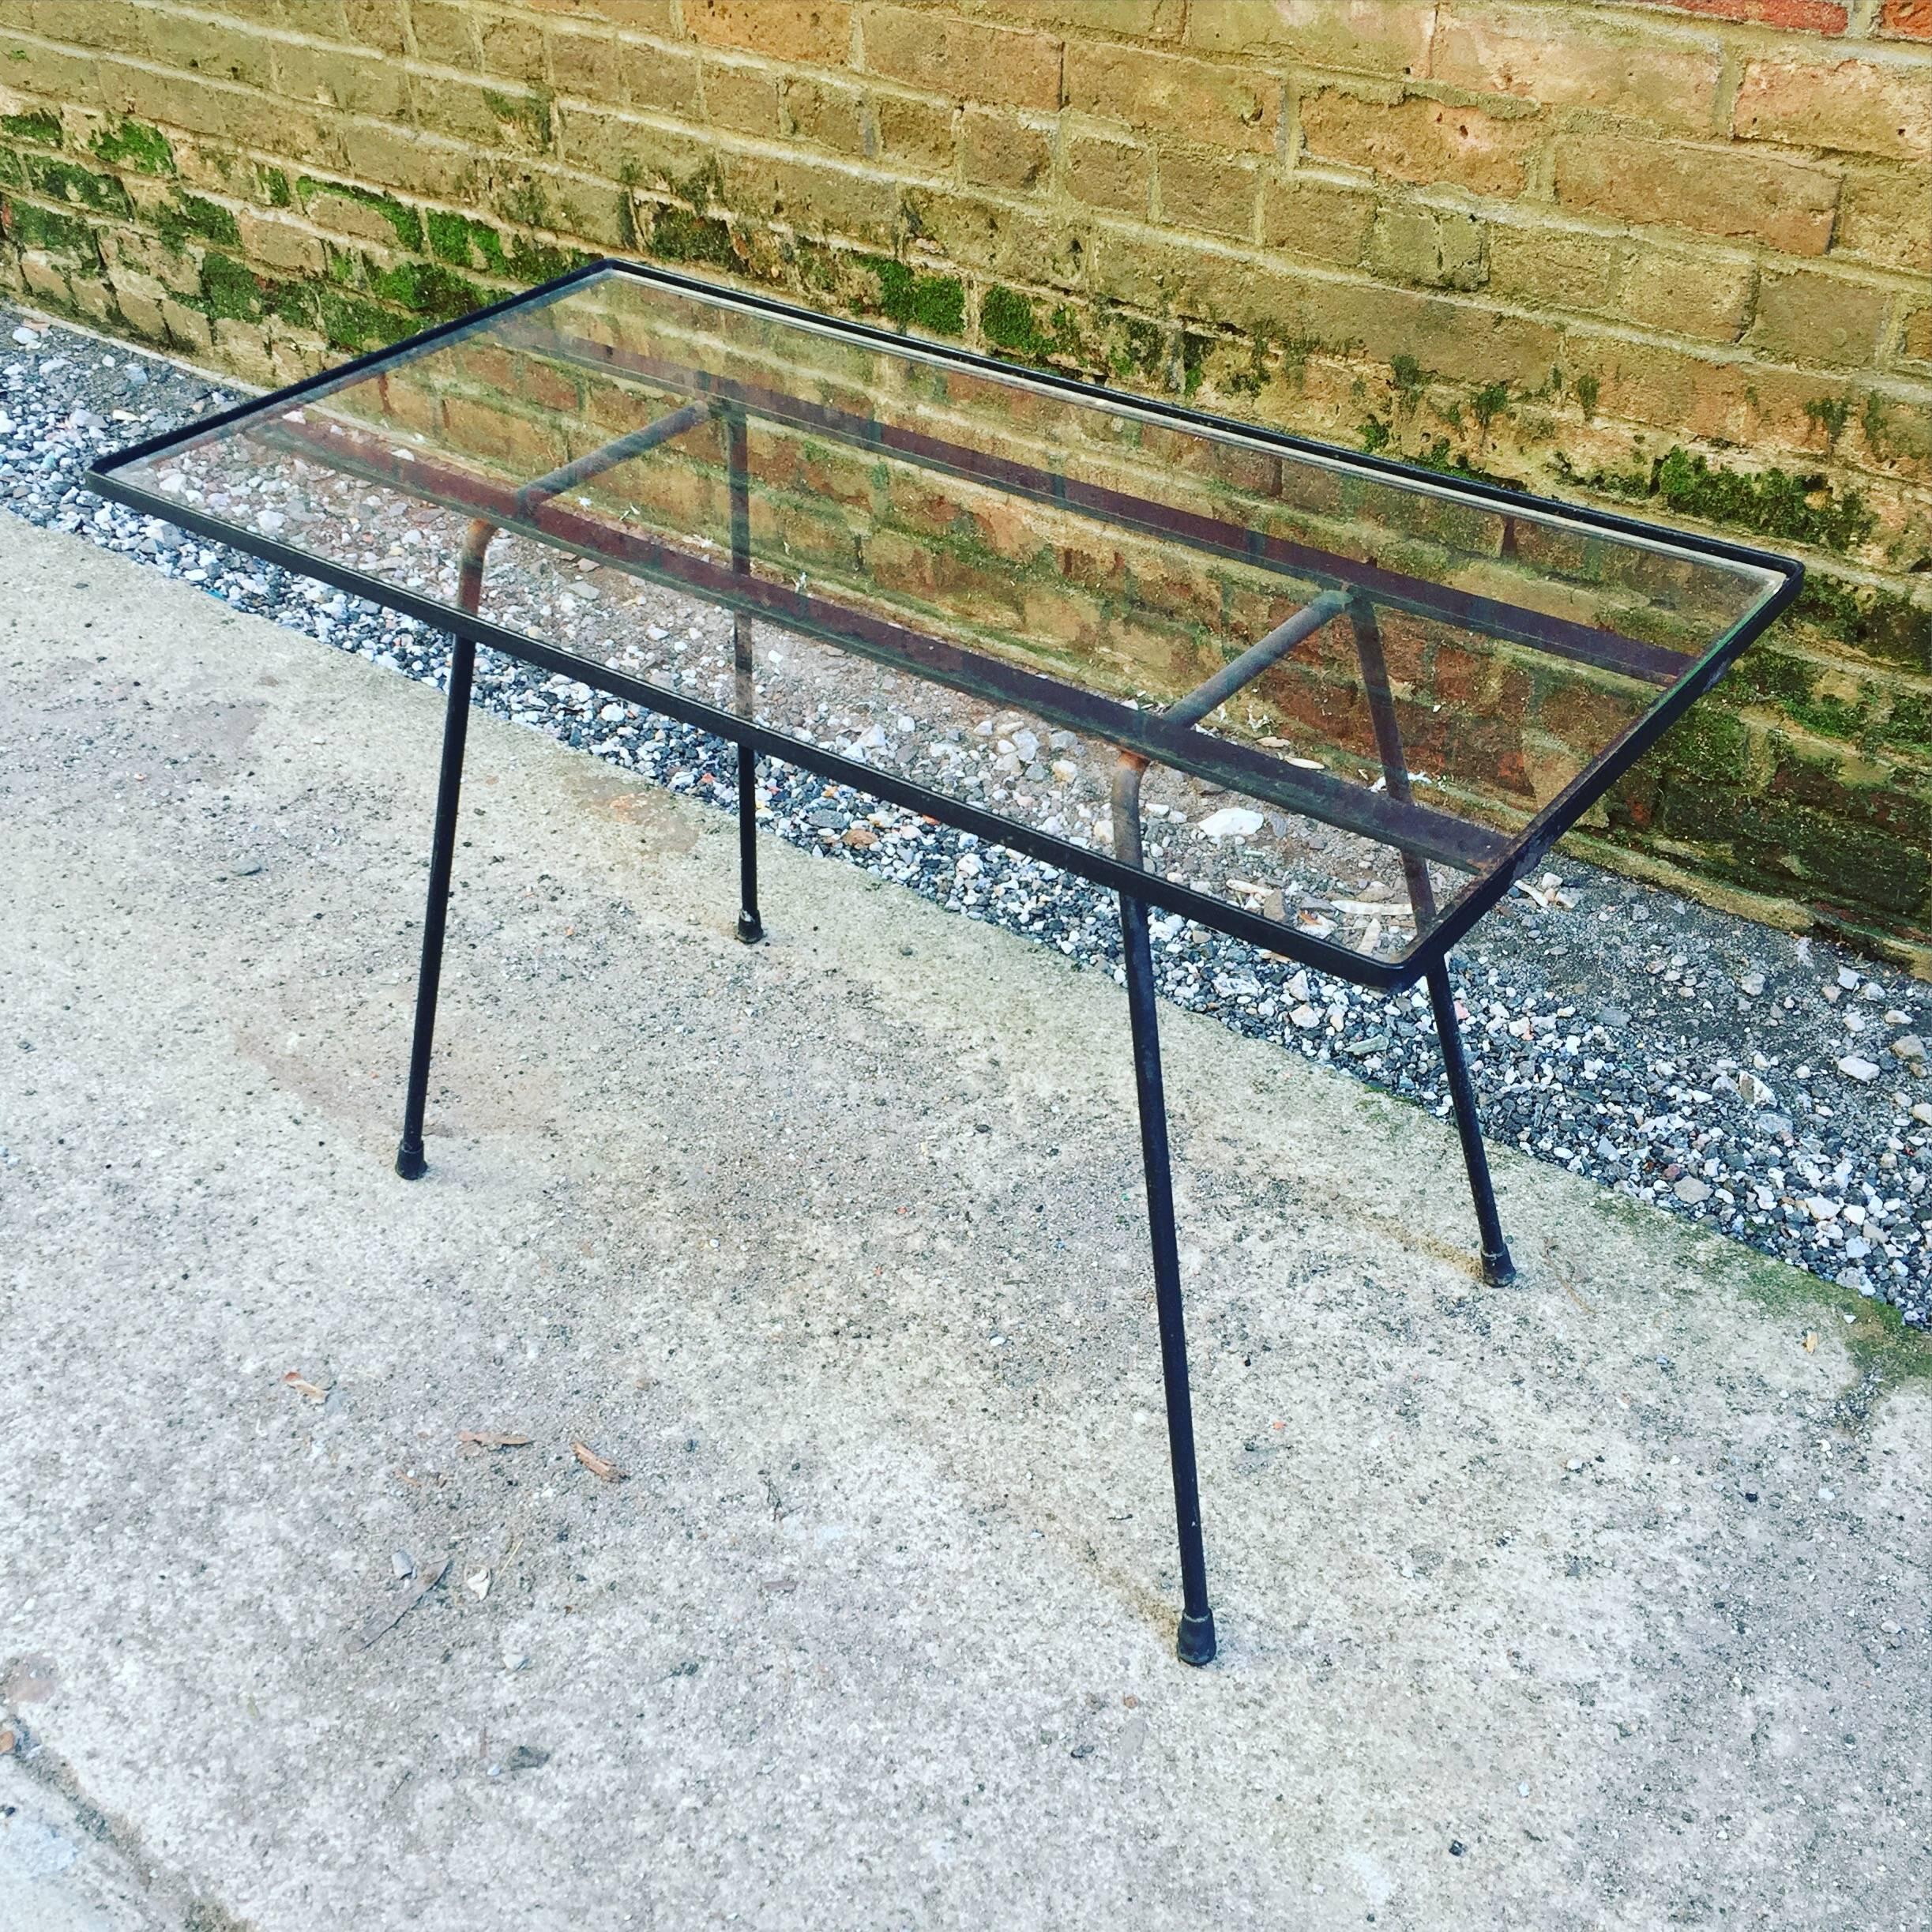 Simple and good iron and glass side table. Reminiscent of Paul McCobb design. Iron frame with glass insert. Round rod splayed legs. Nice scale.